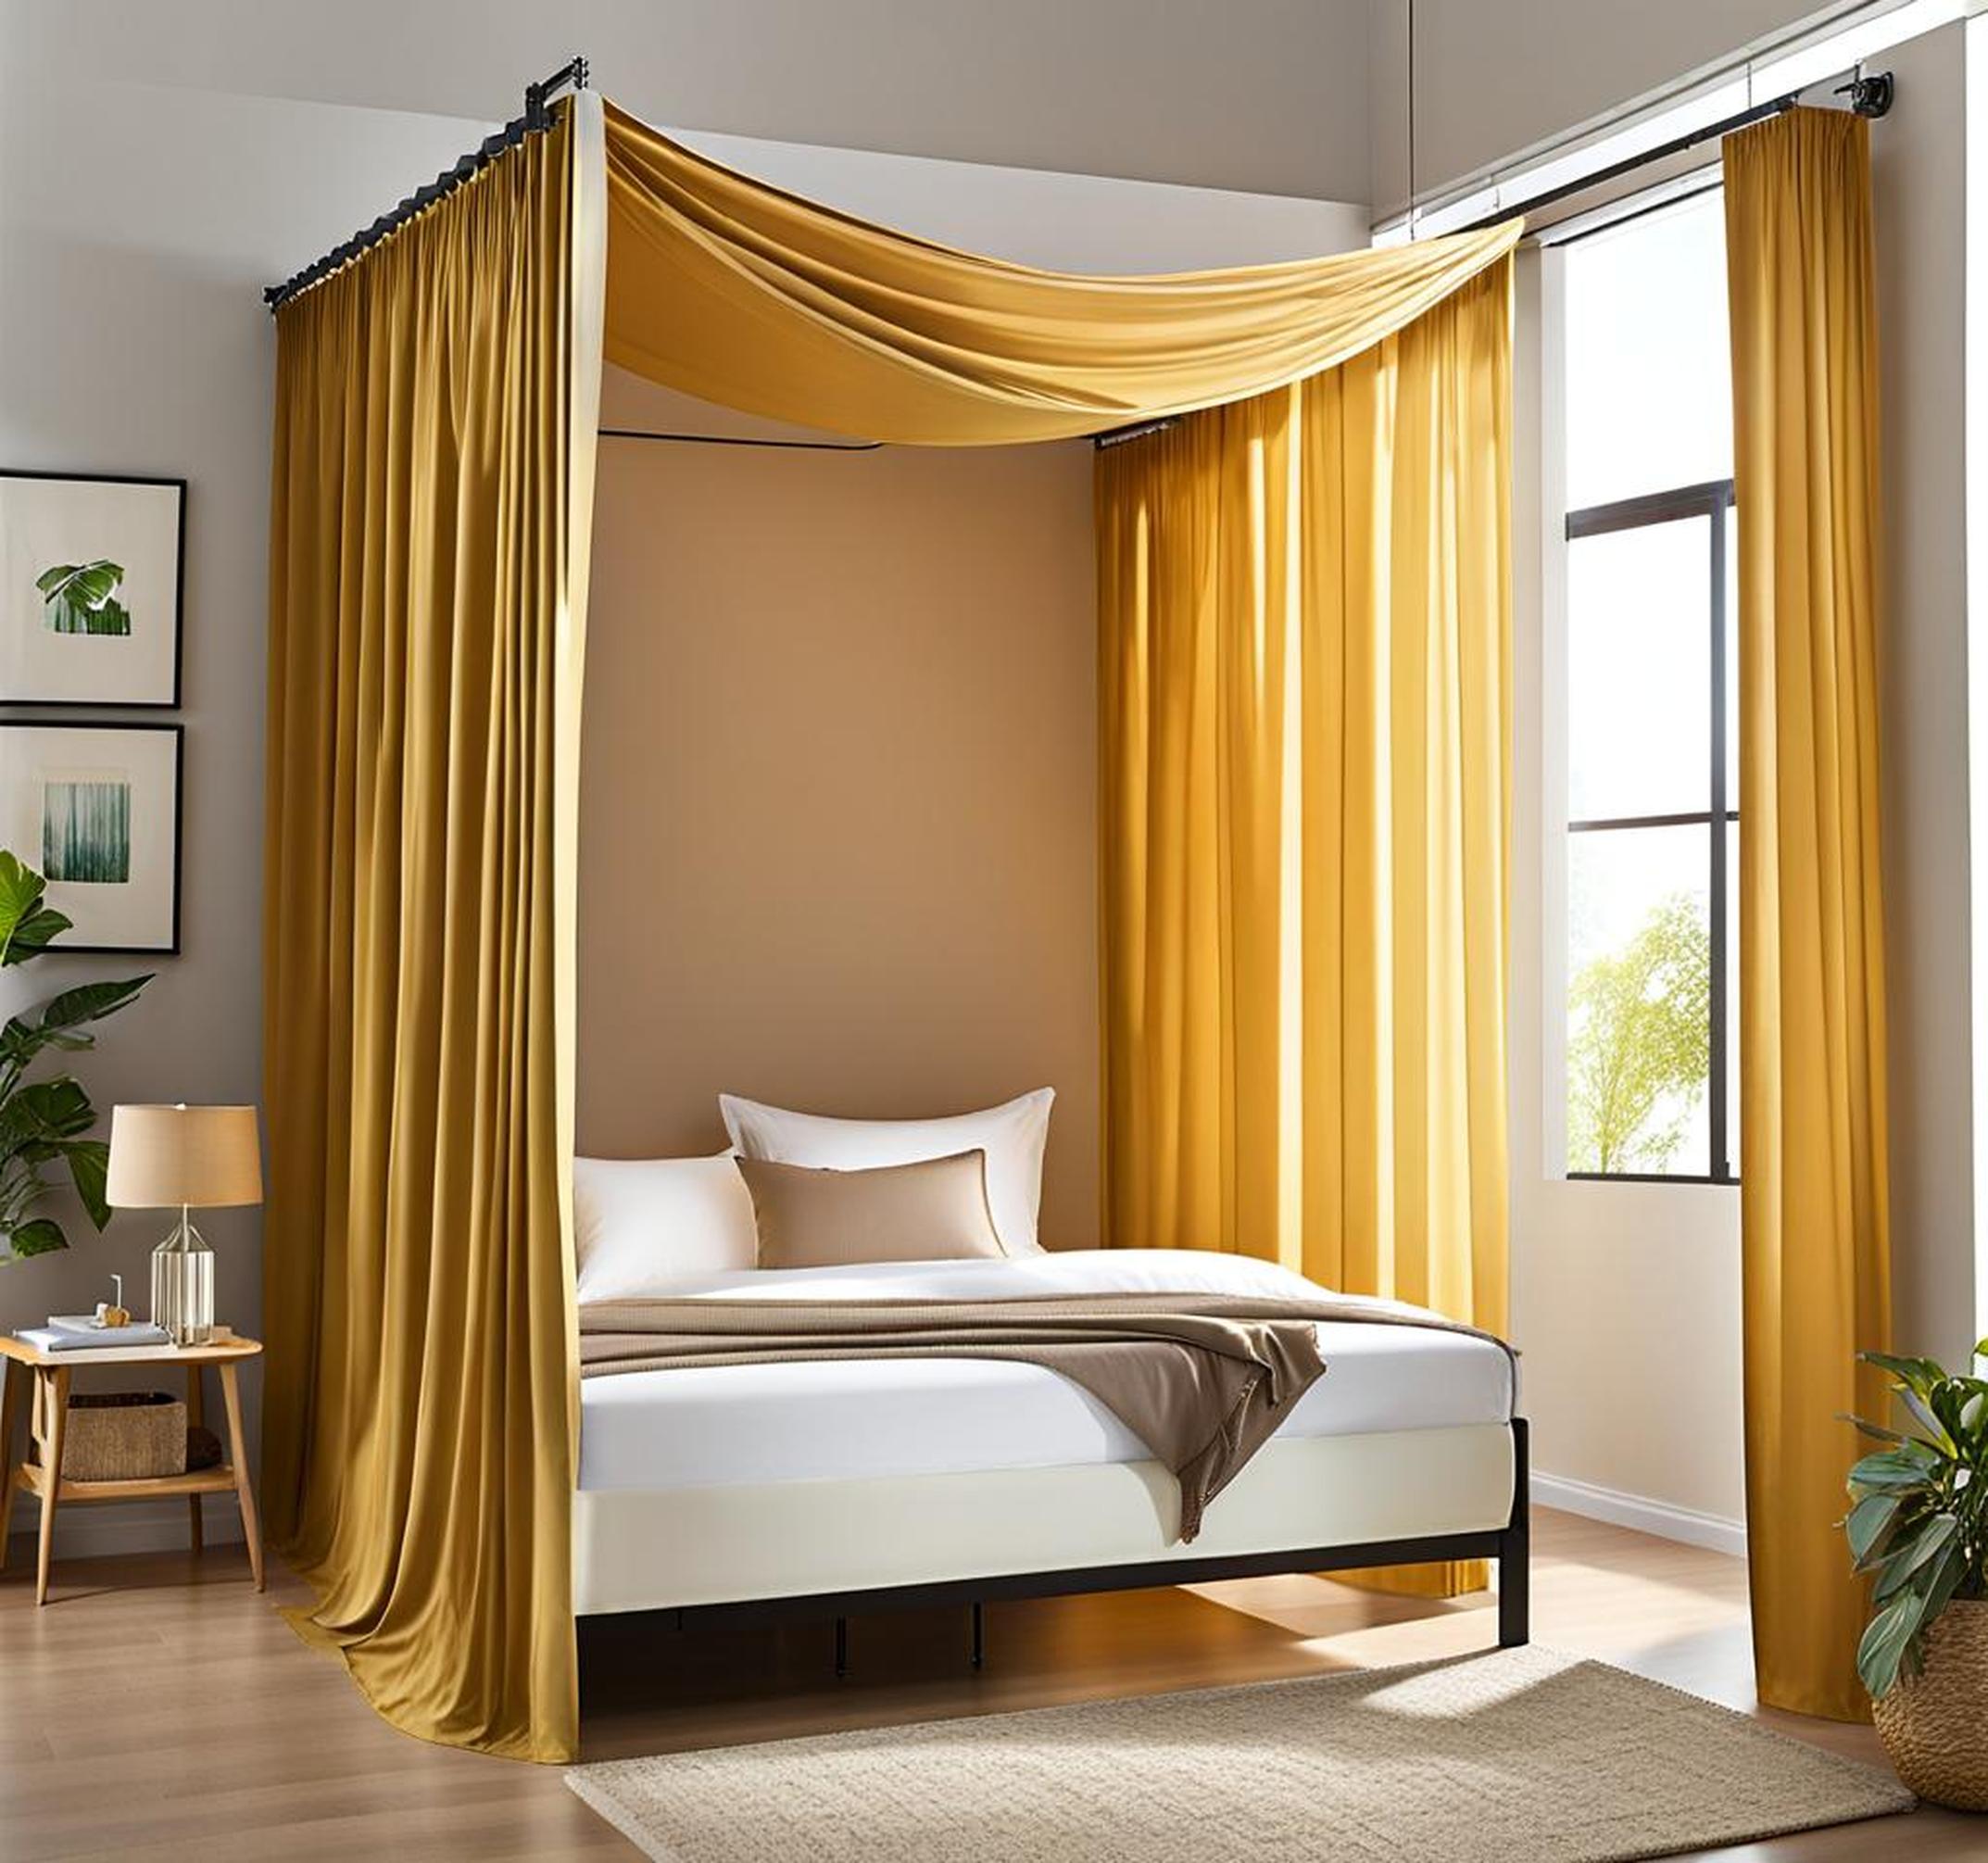 Tired of Noisy Dorms? Discover How Bed Curtains Can Help